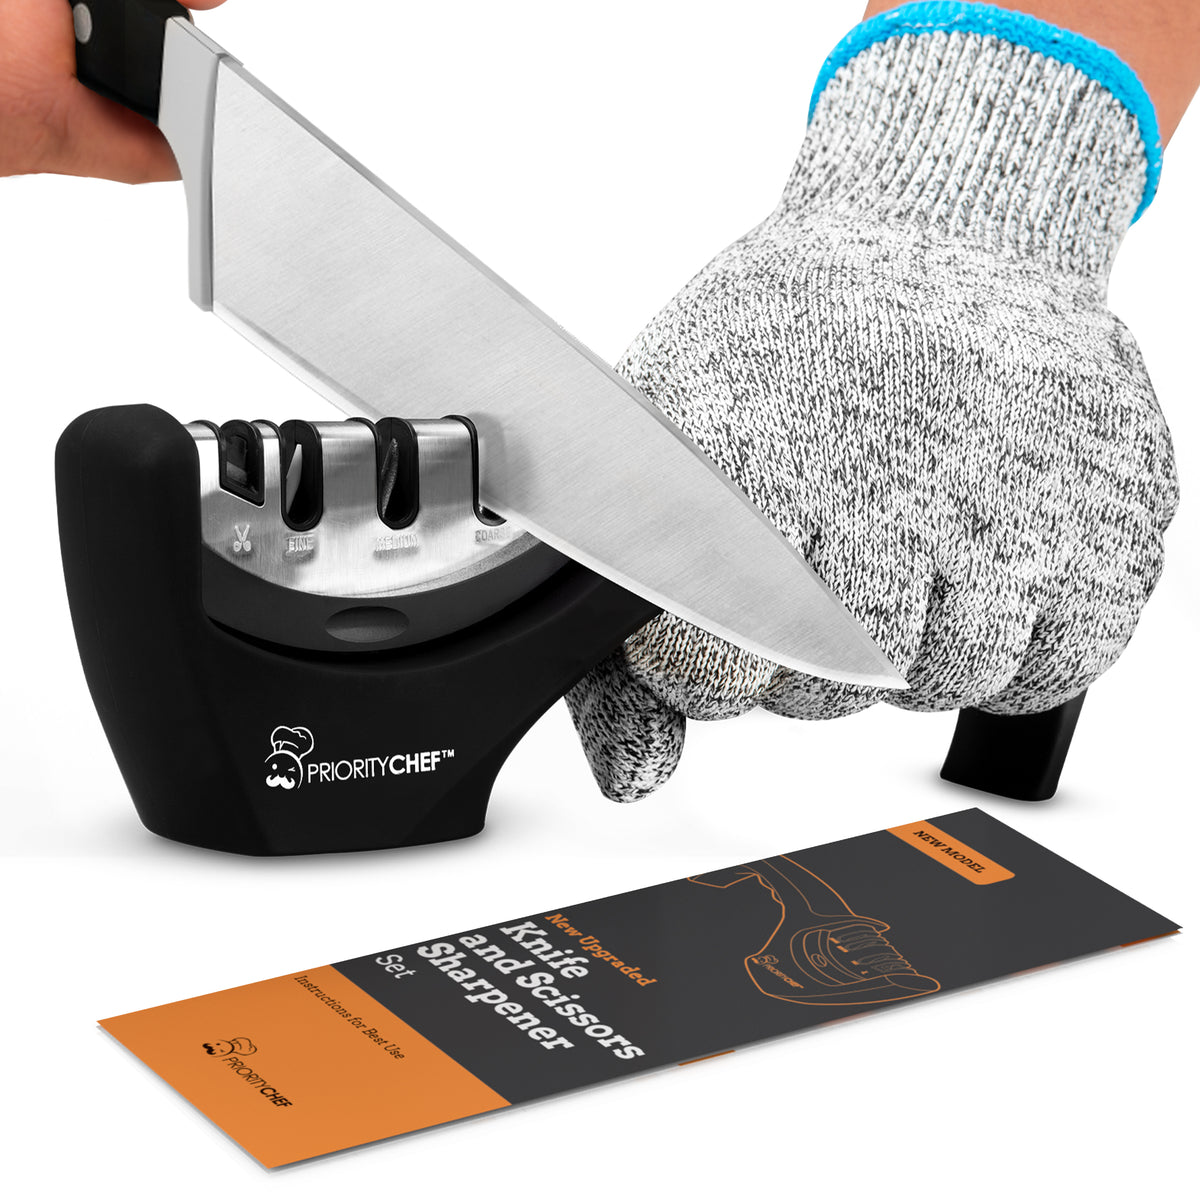 PriorityChef Knife Sharpener for Straight and Serrated Knives, 2-Stage  Diamond Coated Wheel System, Sharpens Dull Knives Quickly, Safe and Easy to  Use